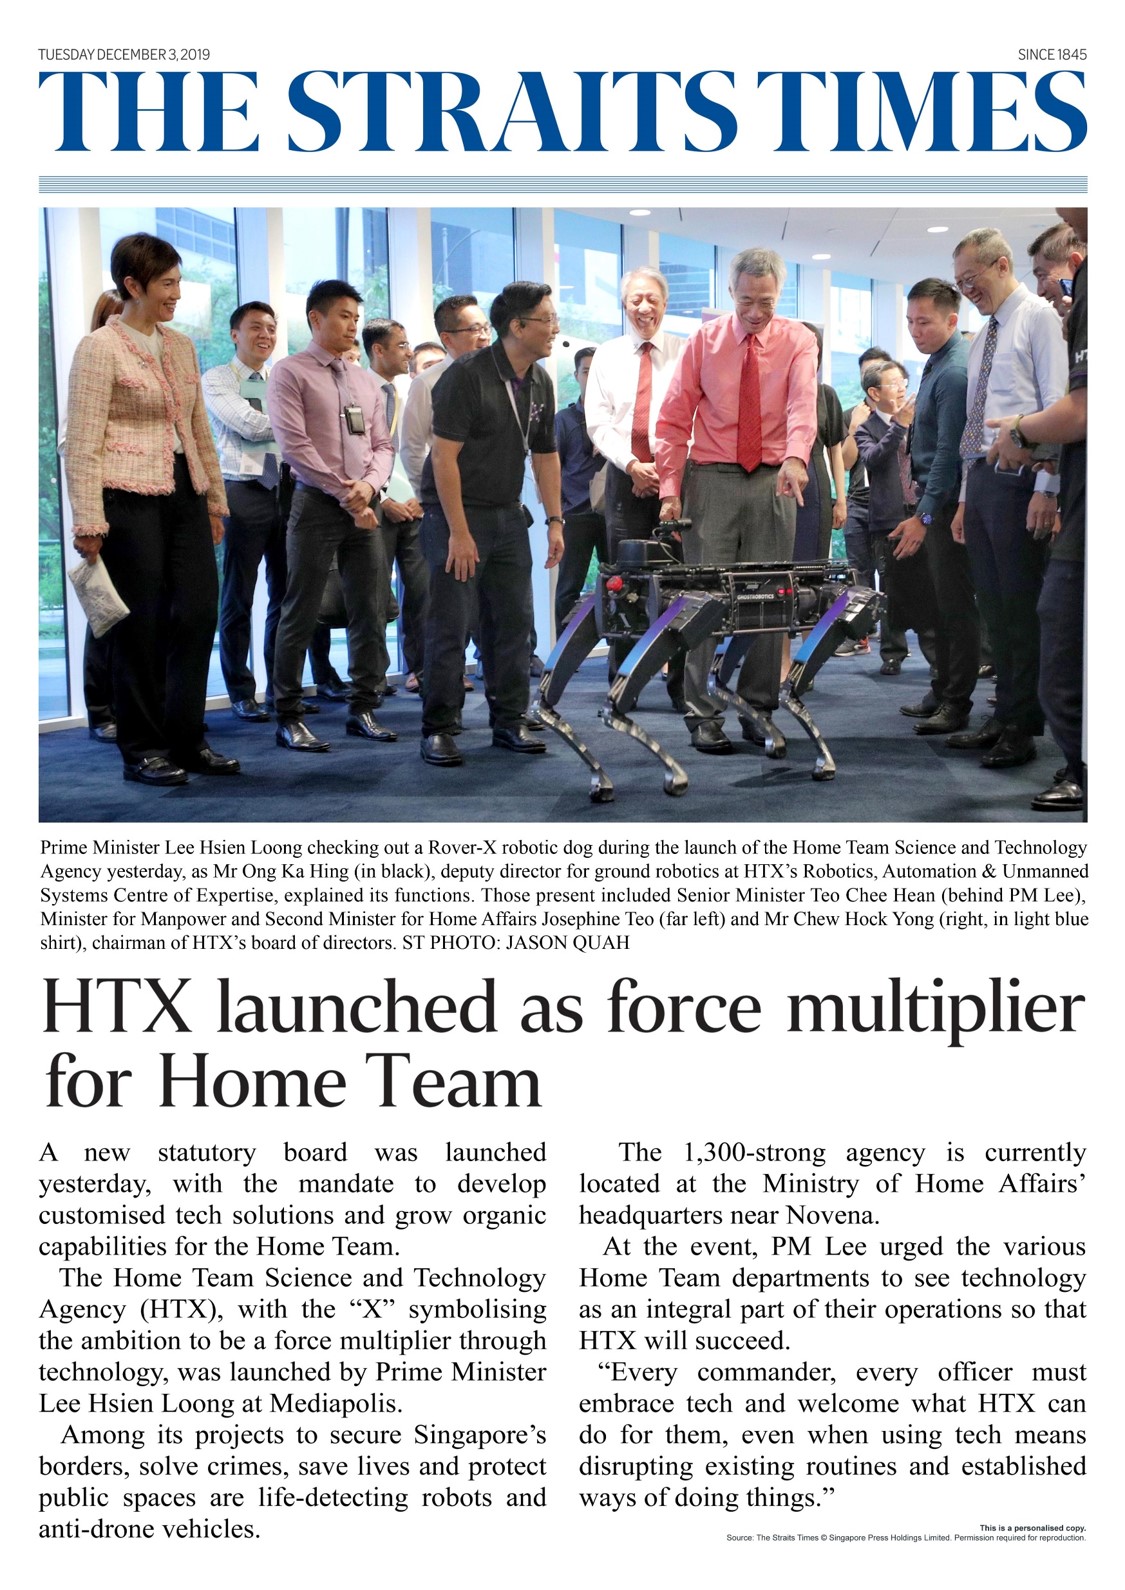 HTX launched as force multiplier for Home Team